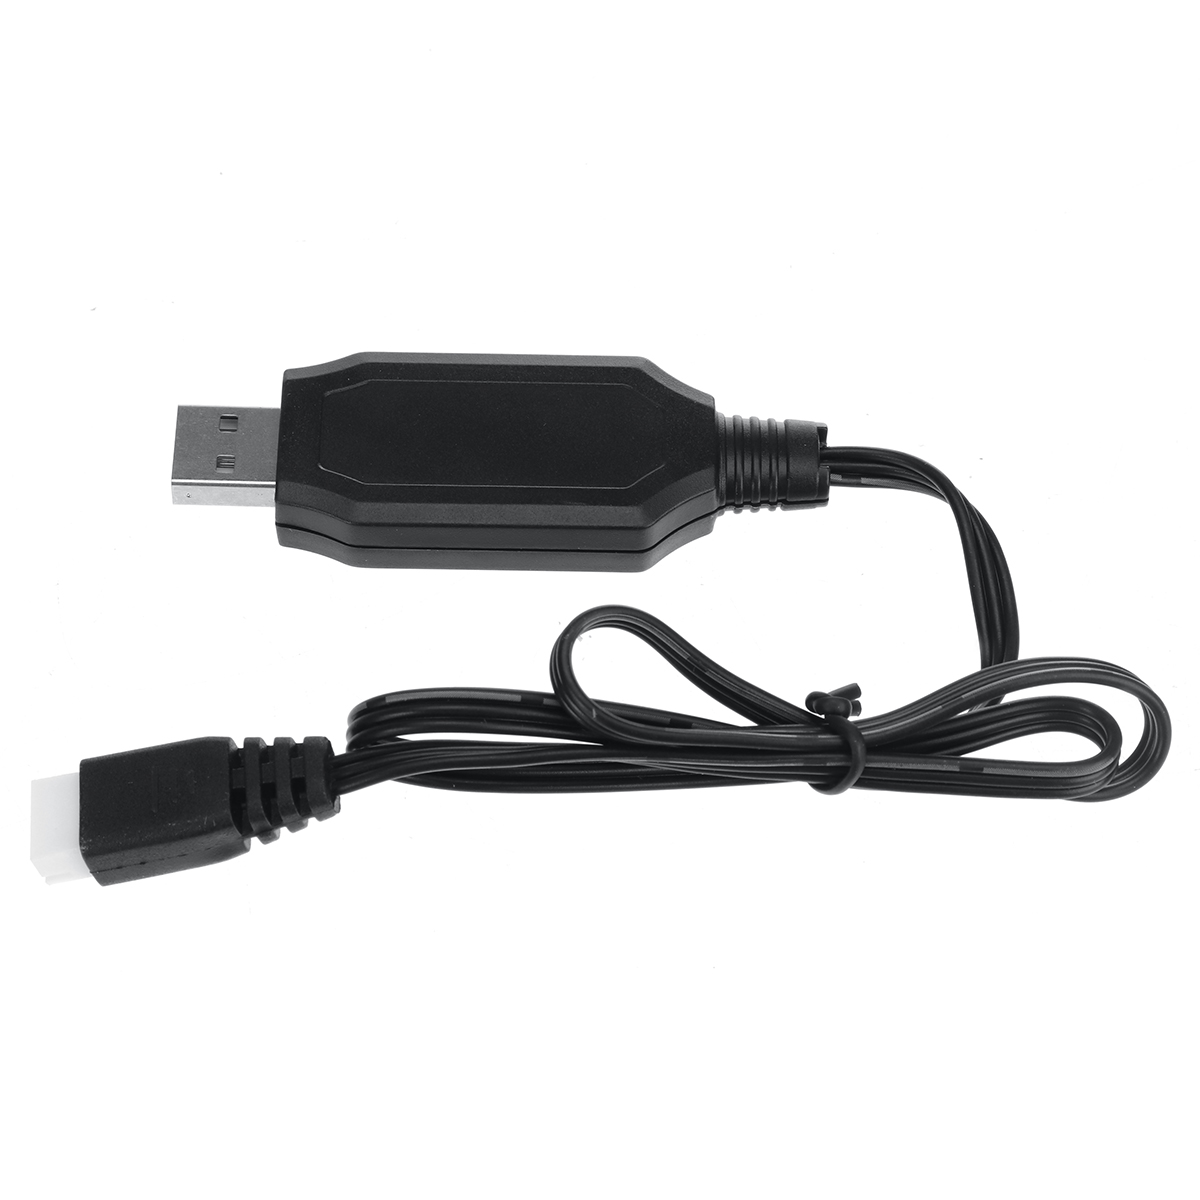 Eachine E120S USB Charger RC Helicopter Parts